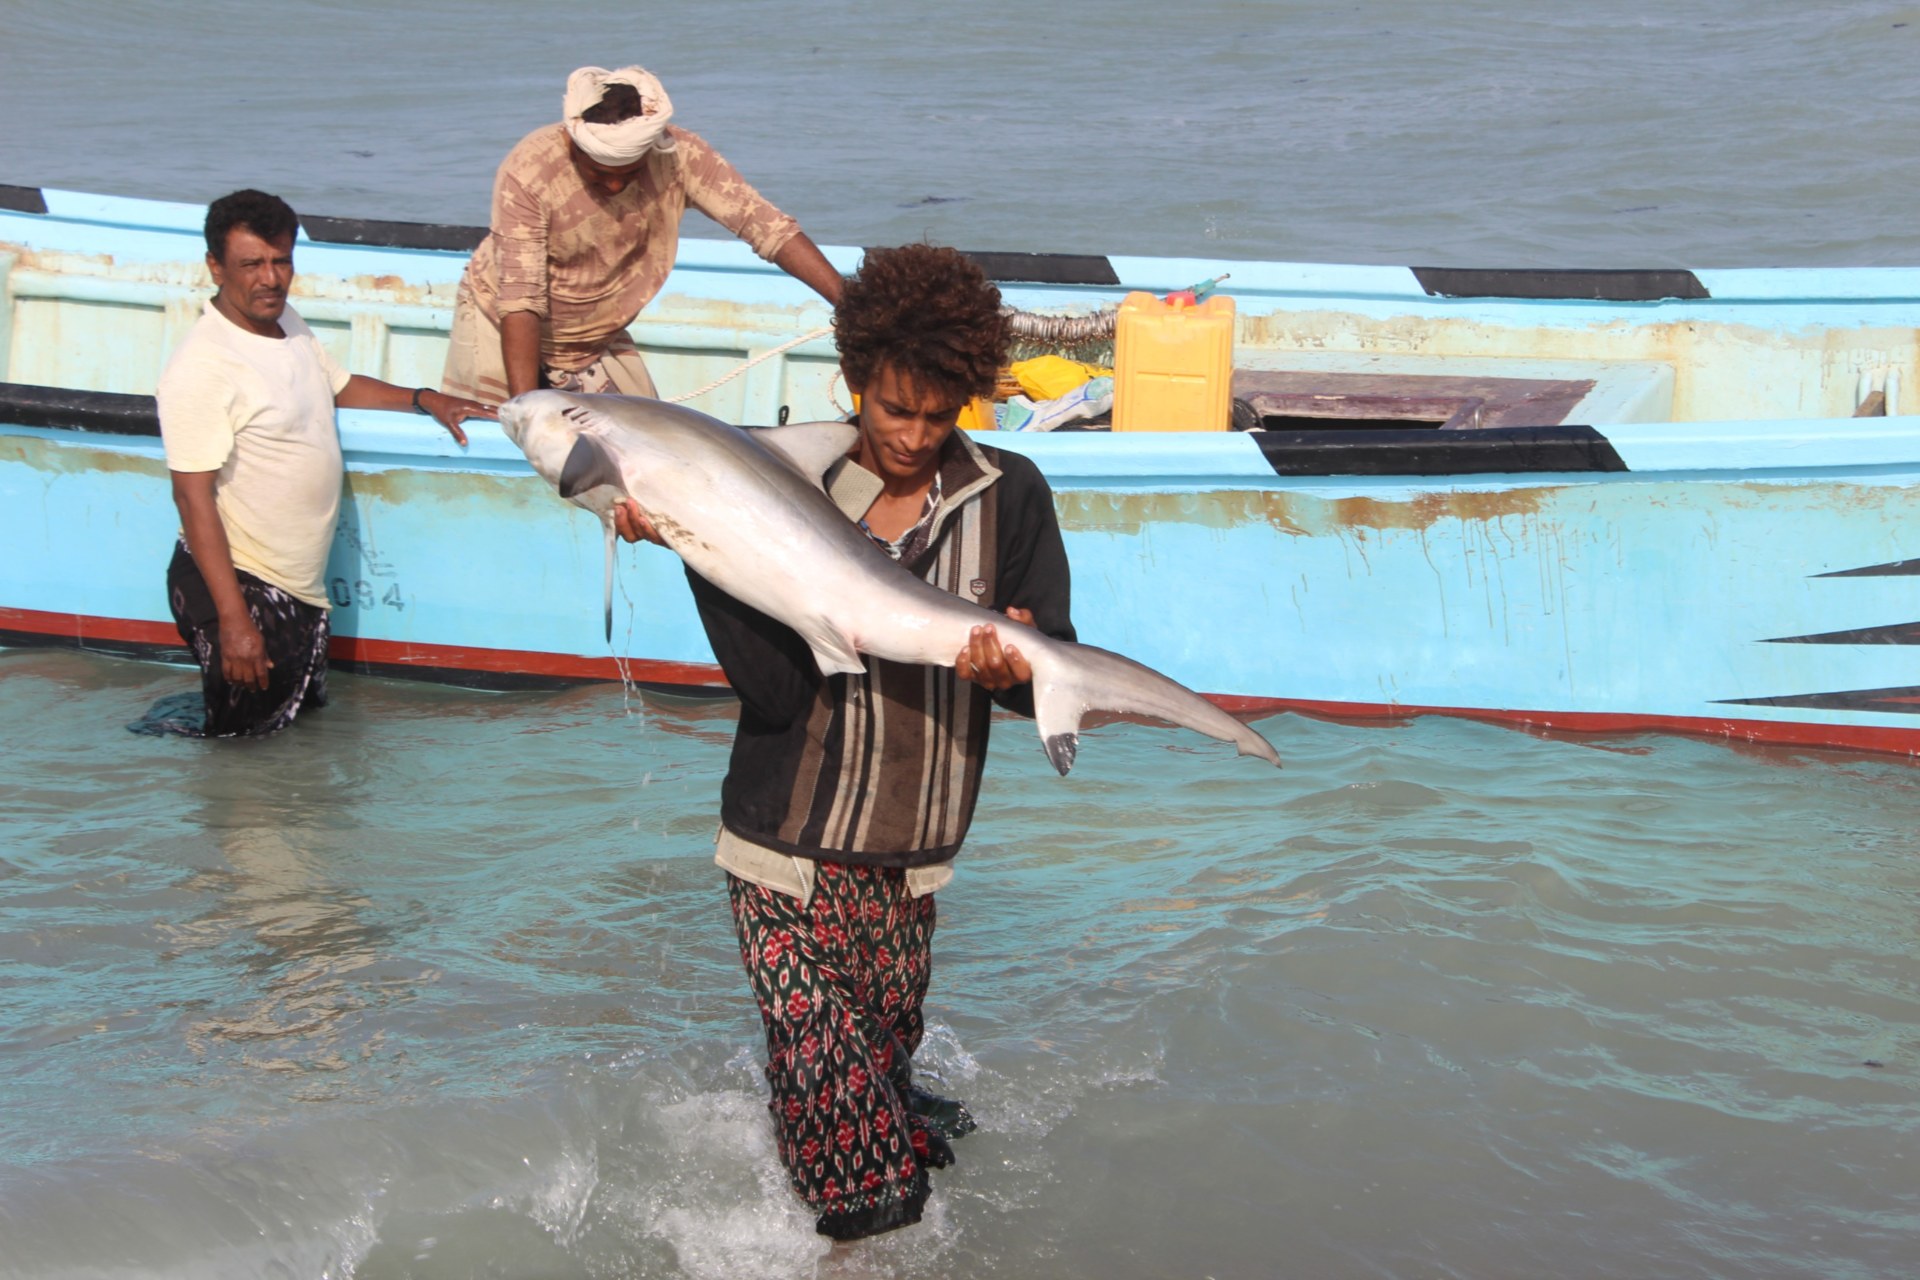 A Yemeni fisherman carries a caught fish back to shore in the Khokha district of the western province of Hodeidah (AFP)